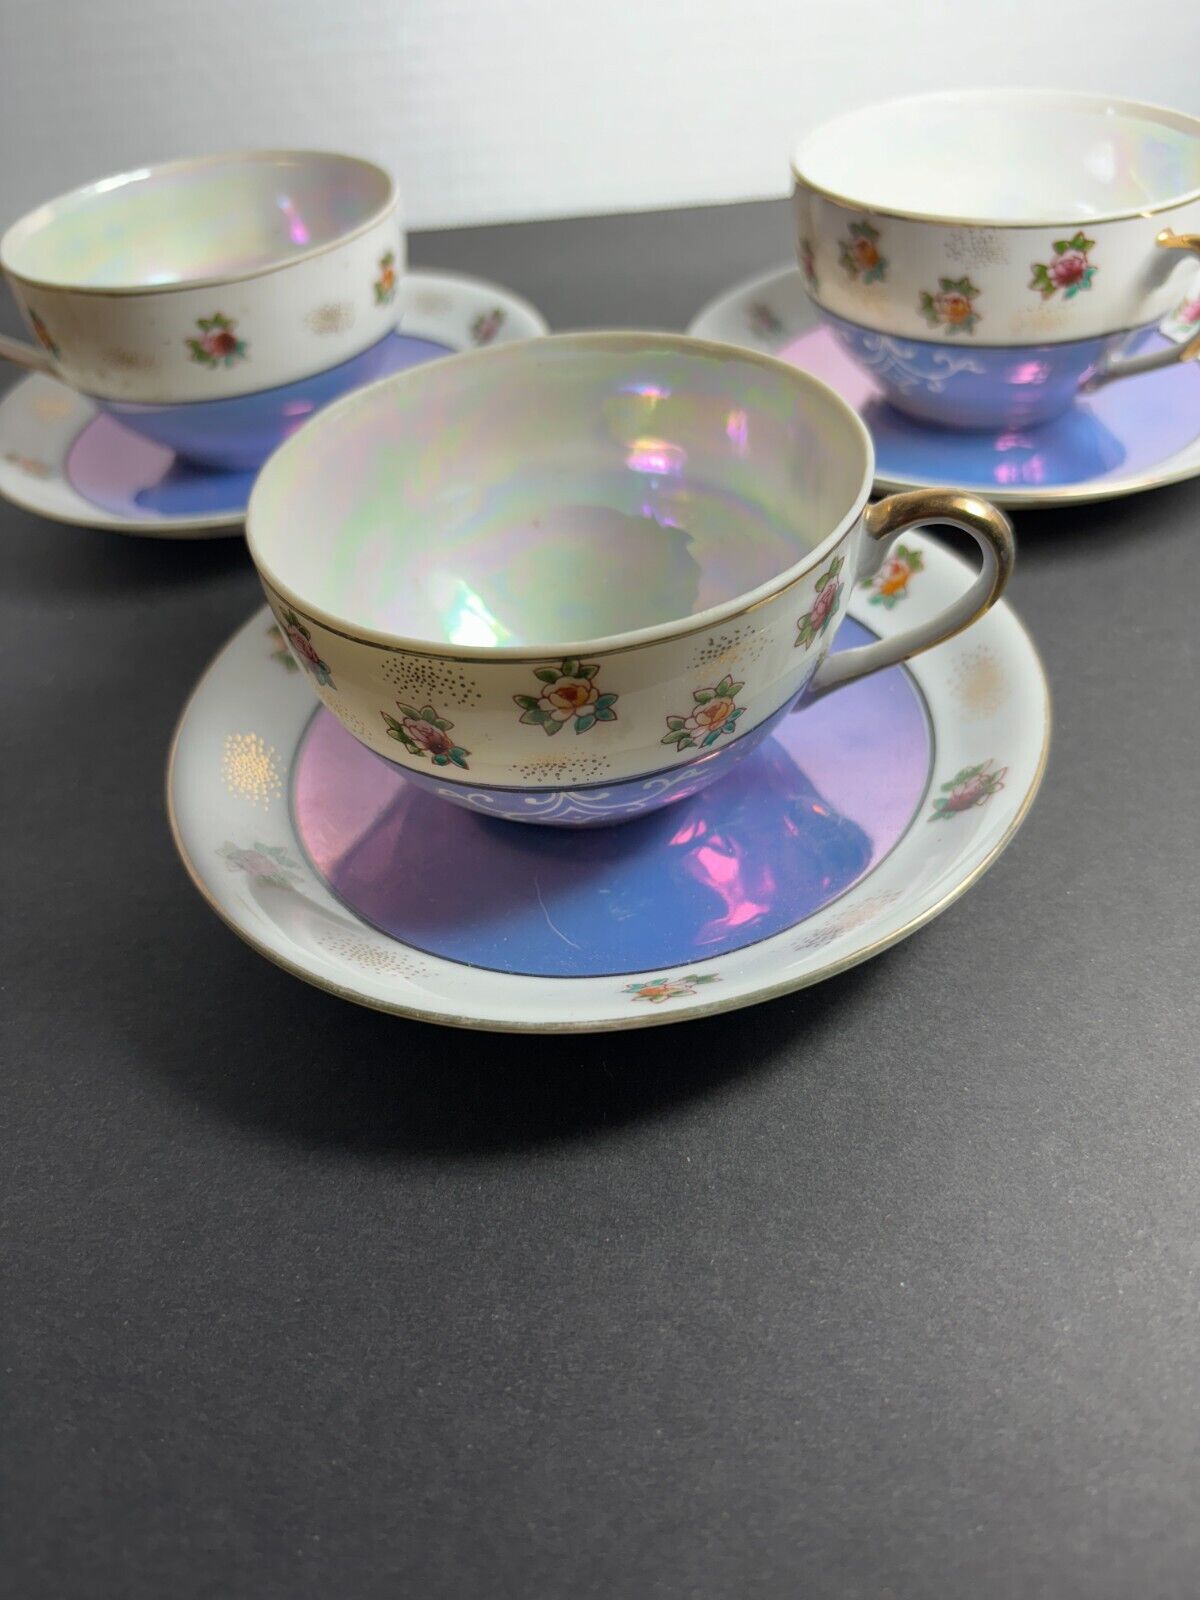 ANTIQUE CHINA TEACUP AND SAUCER IRIDESCENT HAND PAINTED LUSTERWEAR LOT OF 3 SETS